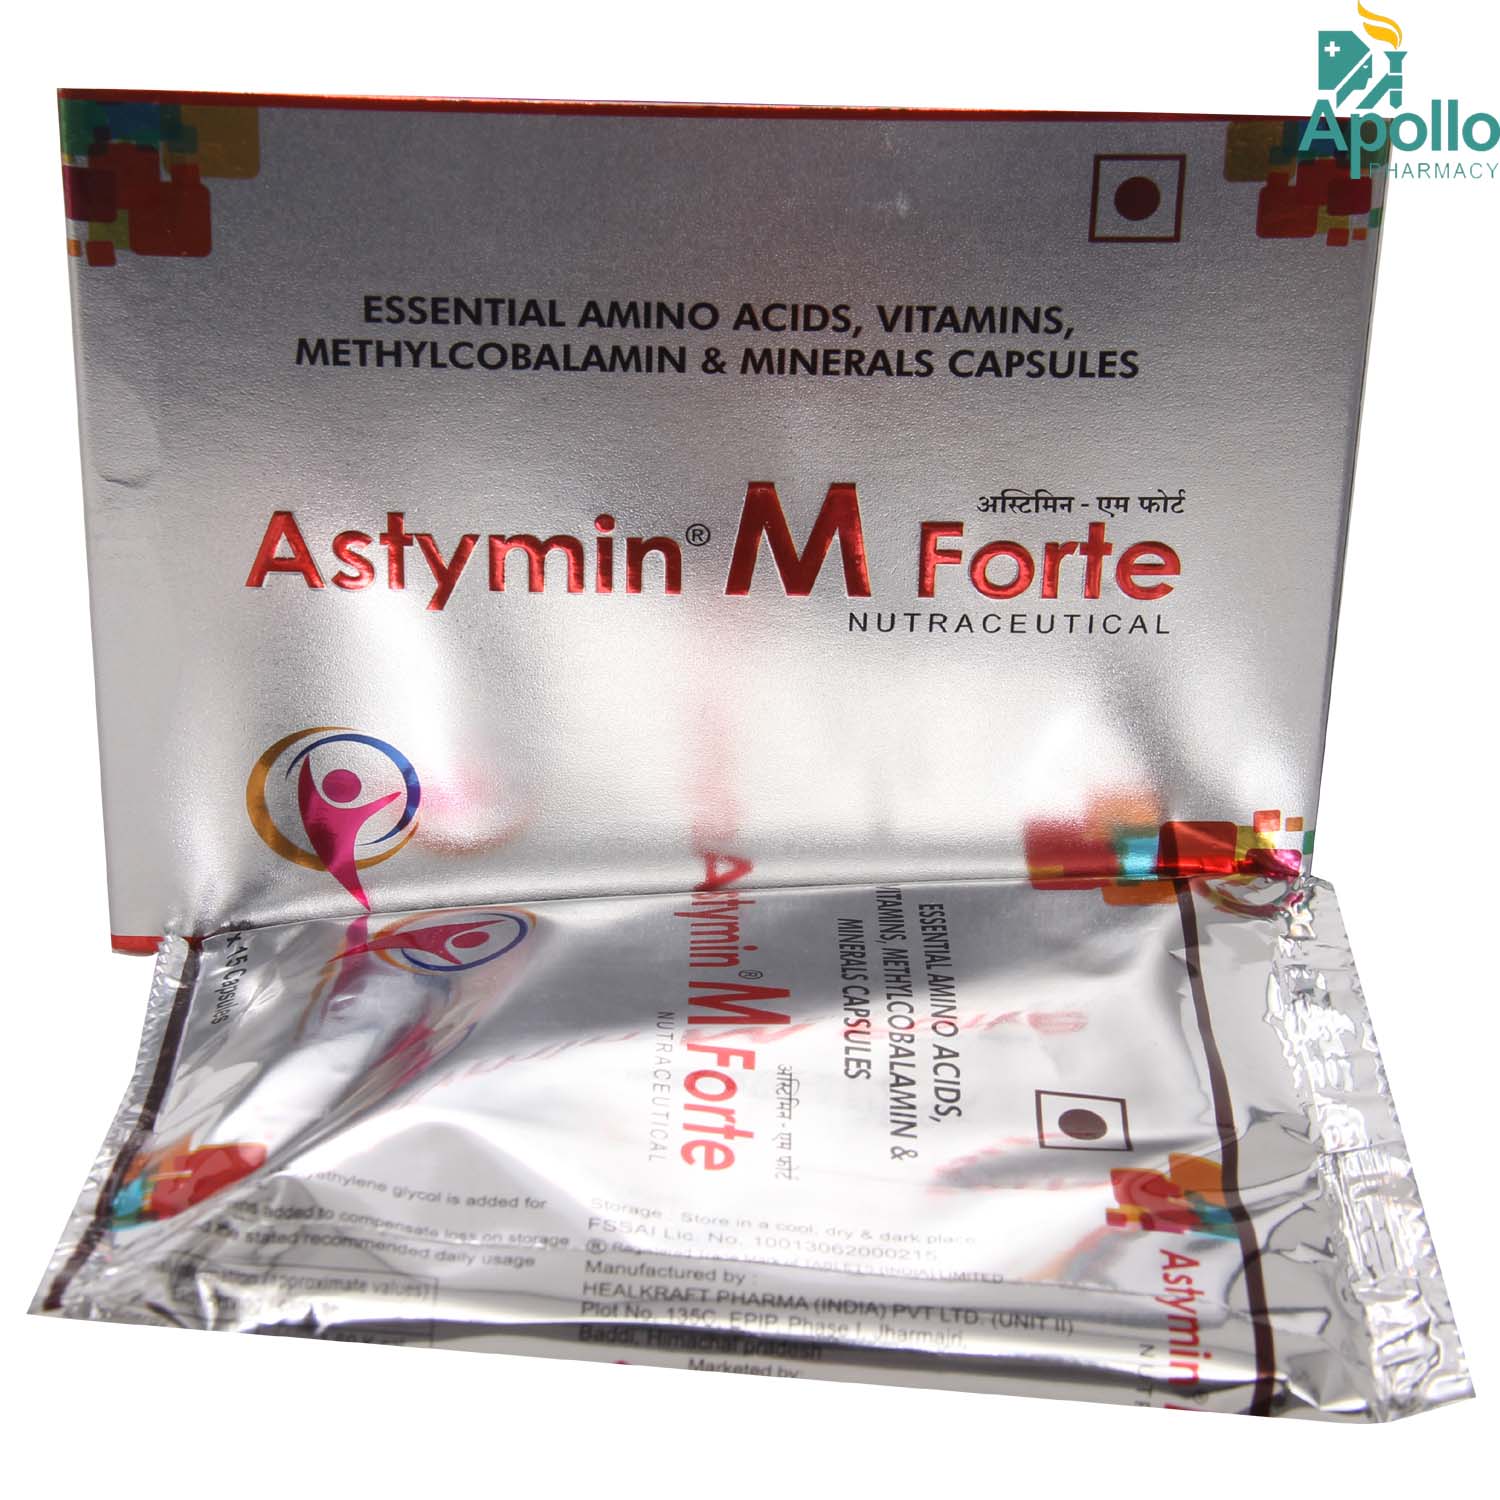 Astymin M Forte Capsule 30's Price, Uses, Side Effects, Composition ...